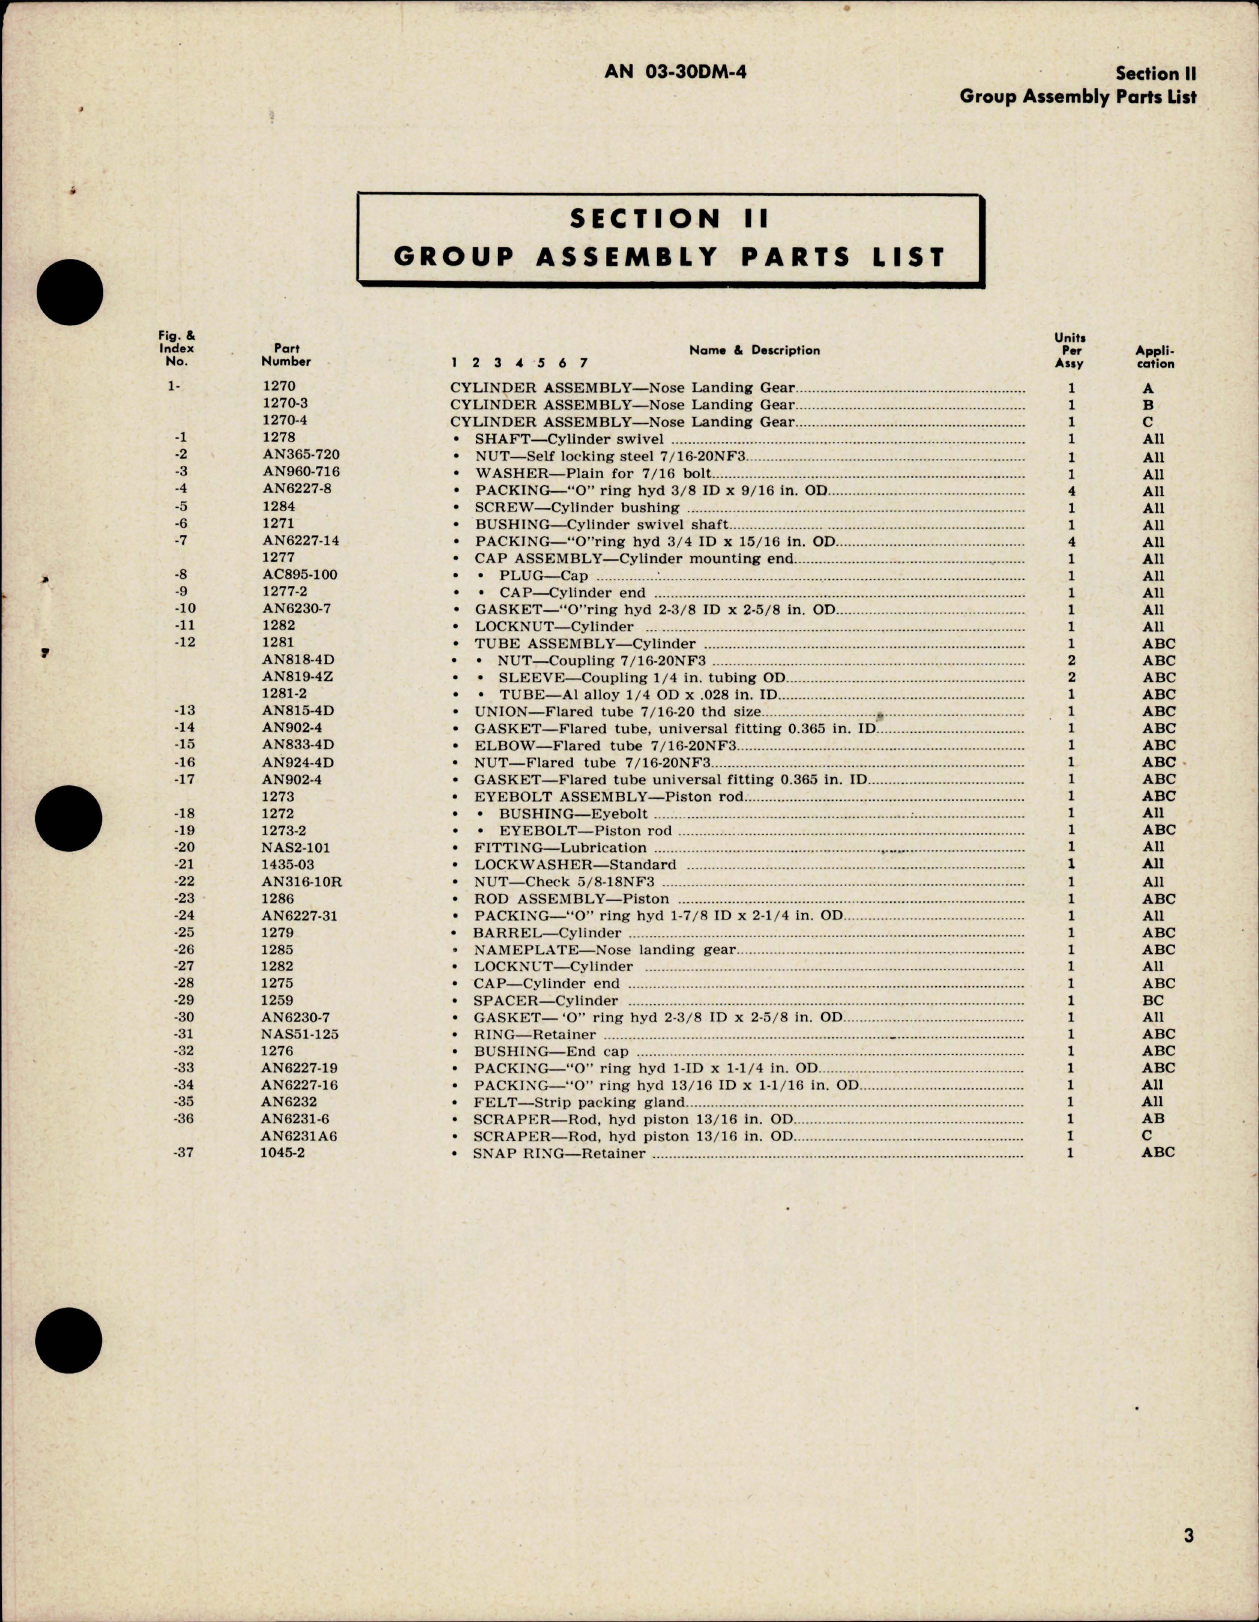 Sample page 5 from AirCorps Library document: Parts Catalog for Nose Landing Gear Cylinder Assembly - Parts 1270, 1270-3, 1270-4, 2687